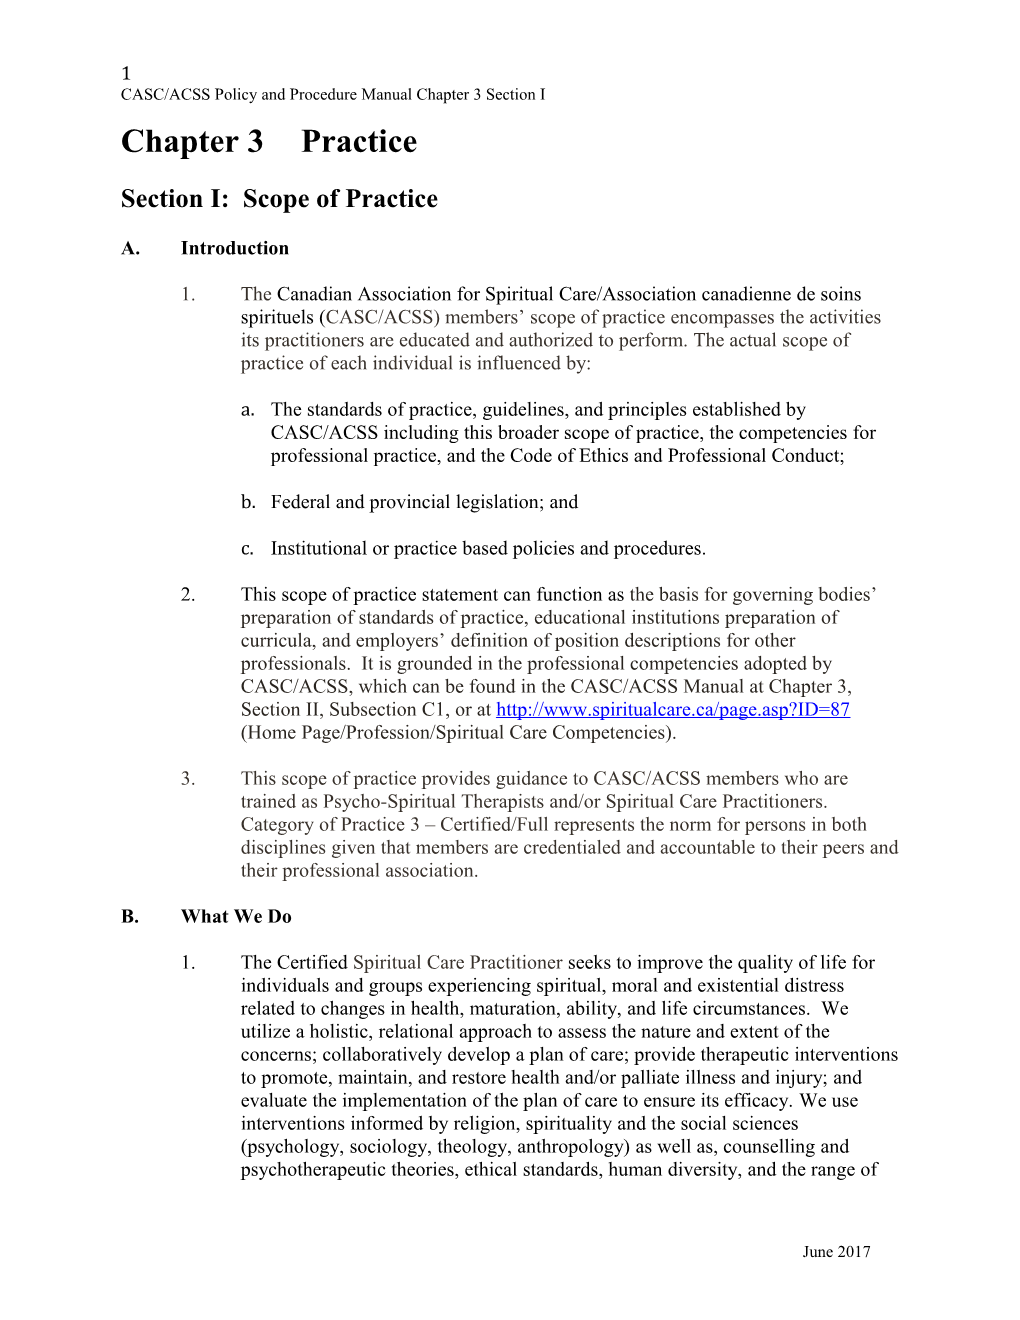 CASC/ACSS Policy and Procedure Manual Chapter 3 Section I